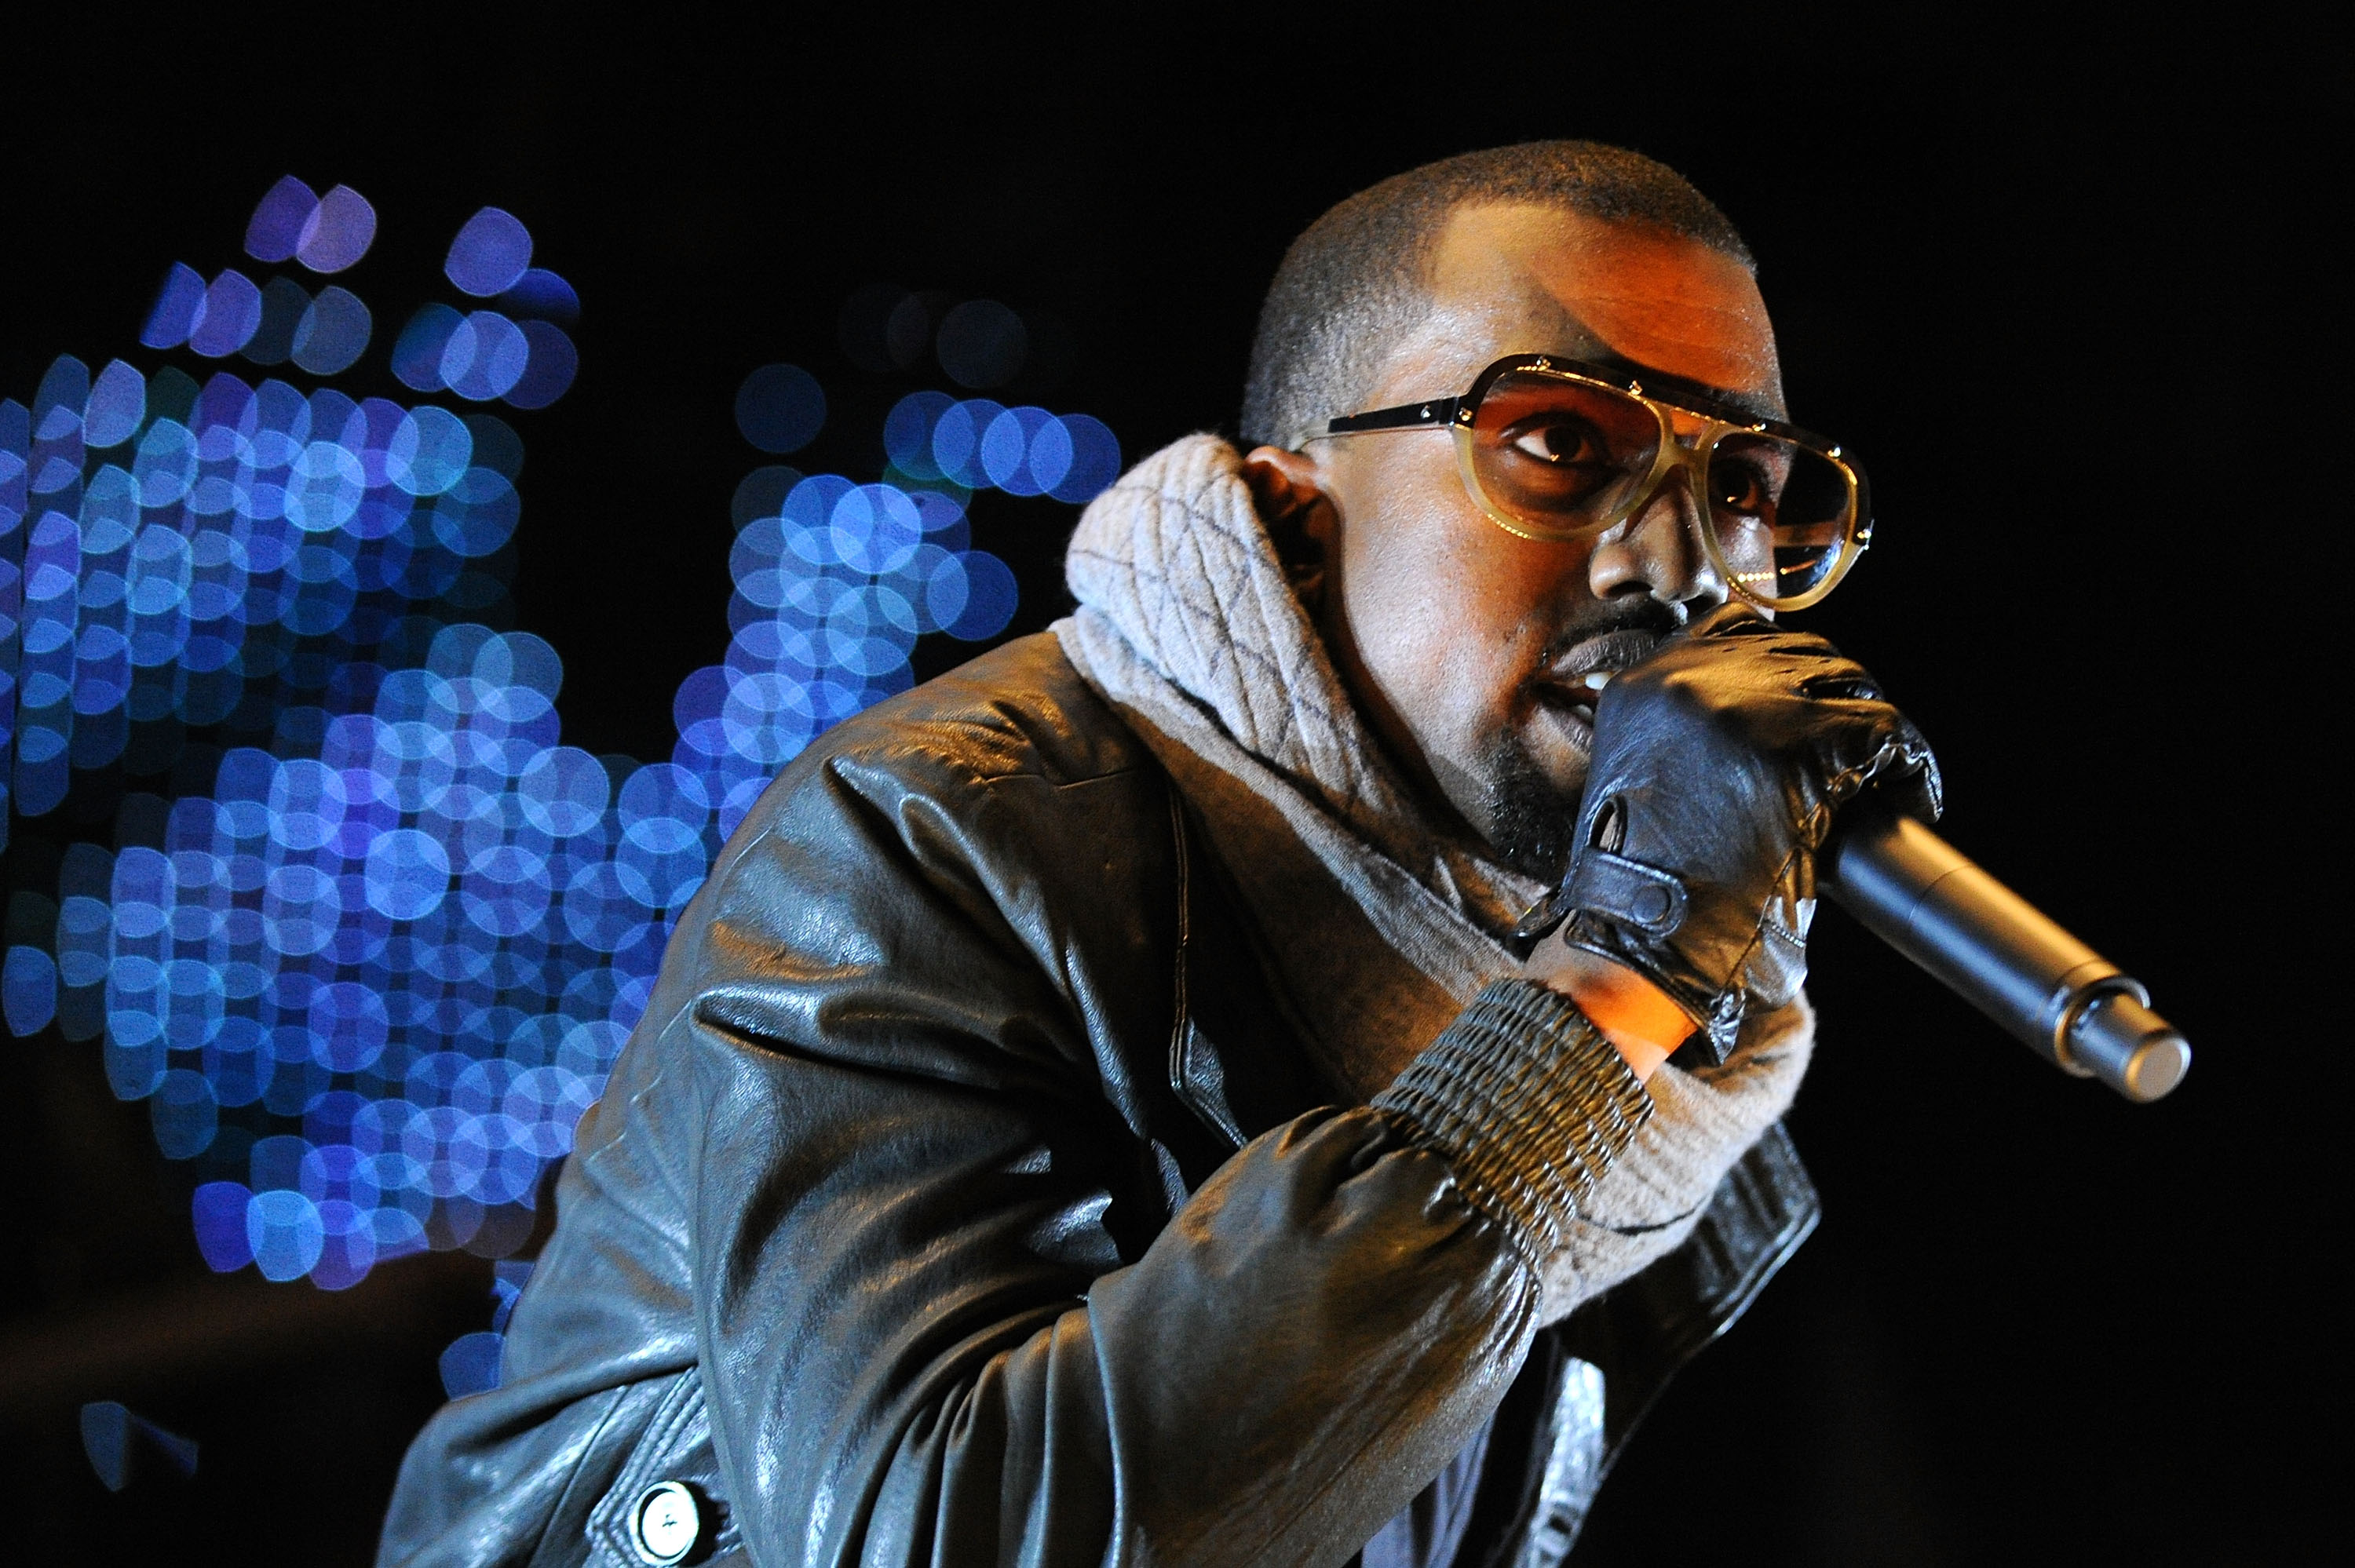 MELBOURNE, AUSTRALIA - FEBRUARY 09: US R&B musician Kanye West performs on stage at the Melbourne stop of the Good Vibrations Festival 2008 at the Sidney Myer Music Bowl on February 9, 2008 in Melbourne, Australia. Good Vibrations is an annual music festival staged at various Australia cities within natural surroundings as the backdrop for proceedings. (Photo by Kristian Dowling/Getty Images)